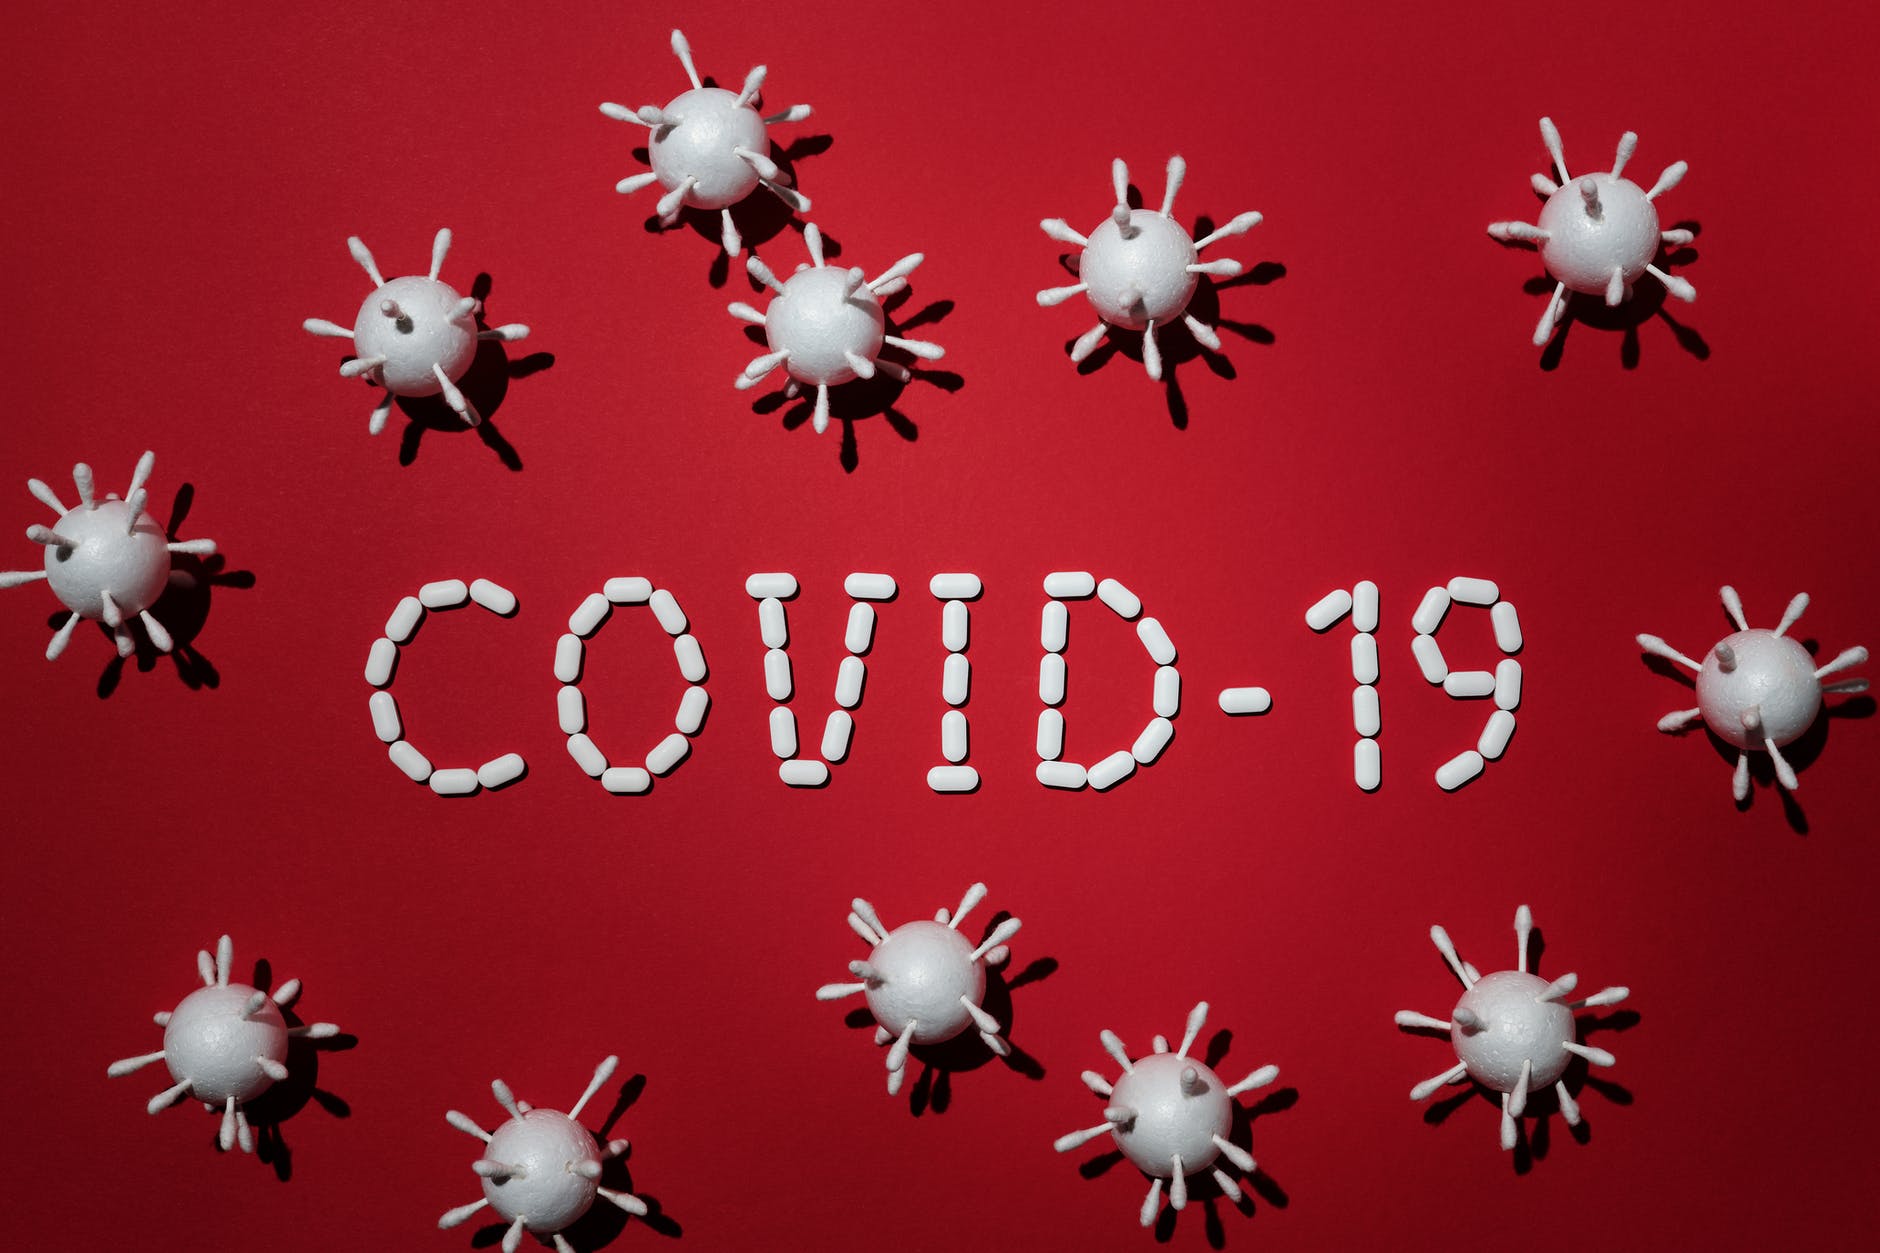 Non-Pharmaceutical Strategies Are Capable For COVID-19 Control